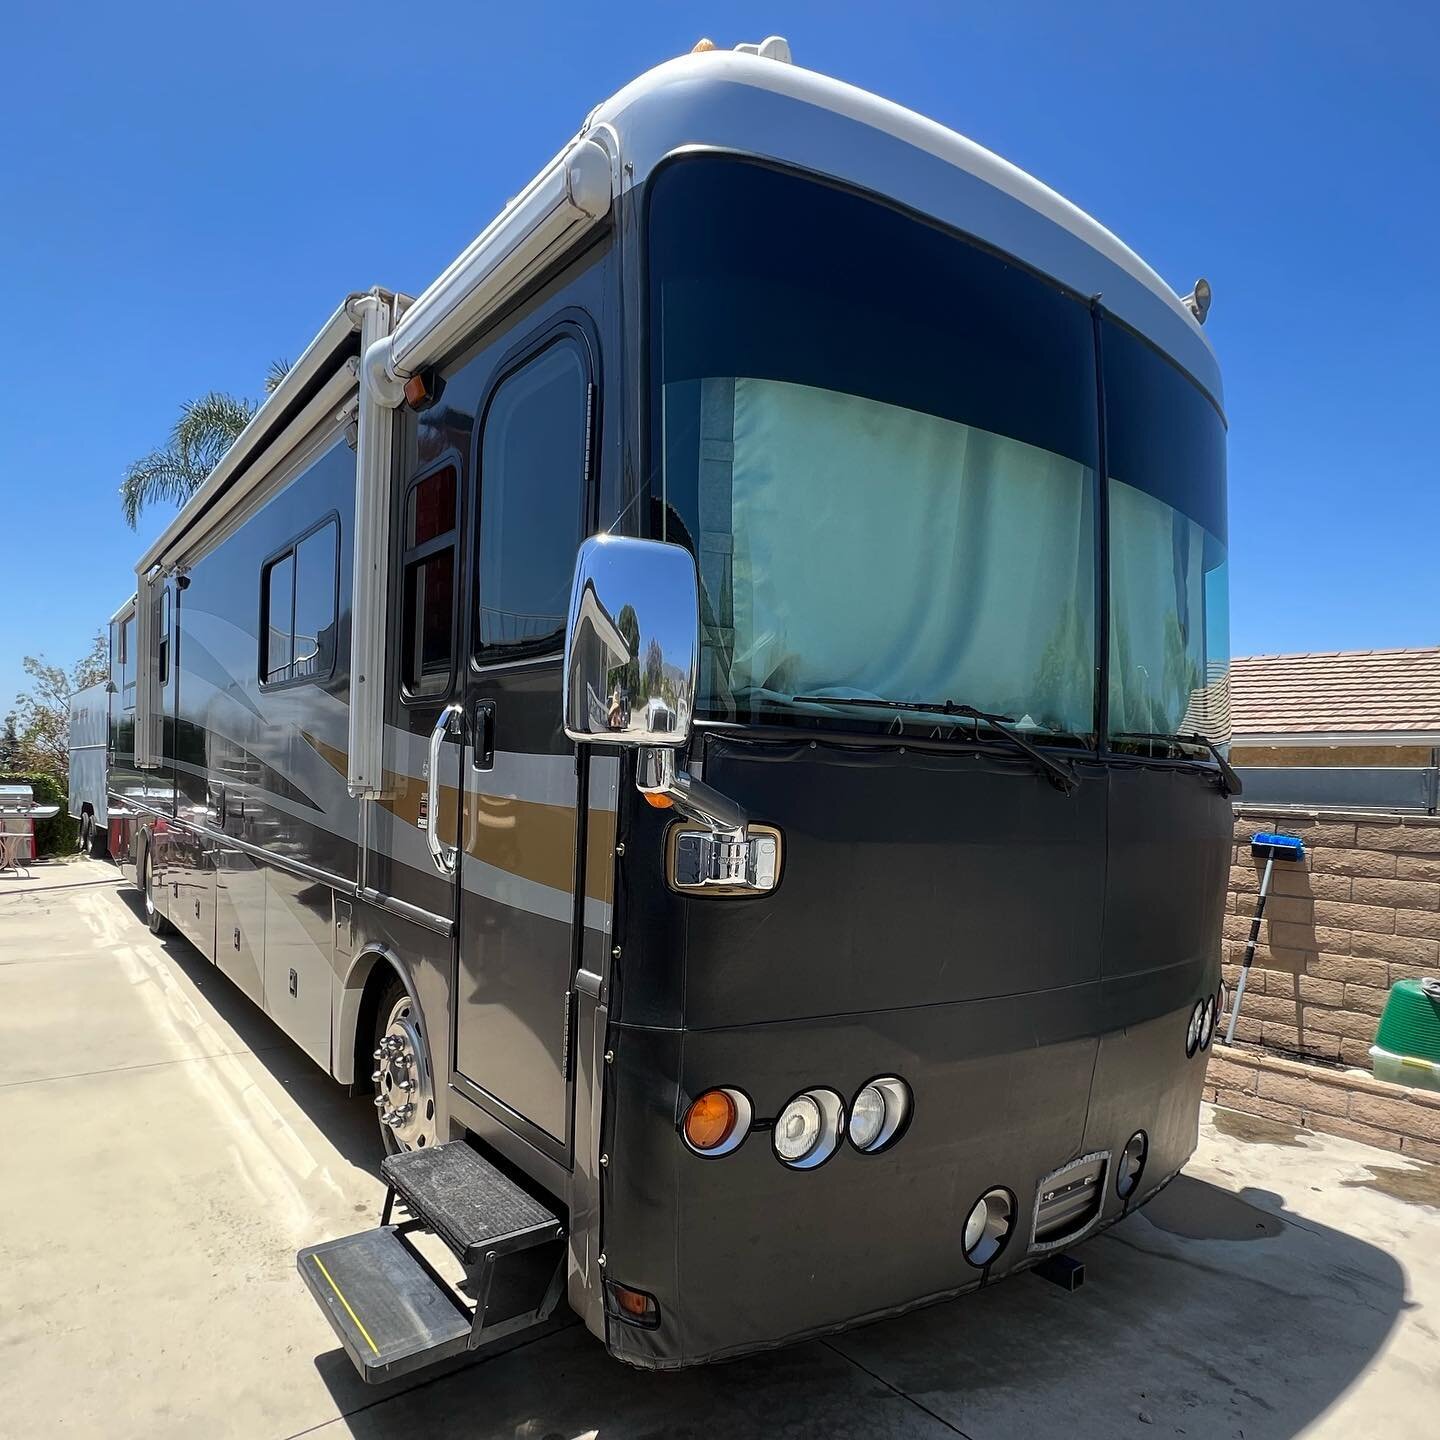 RV dialed in for a Level 1 wax/sealant detail. 
Ready for this summer heat 🔥

#caliluxxmobiledetail 
#mobiledetailing
#rvlife 
#inlandempire 
#sonaxgermany